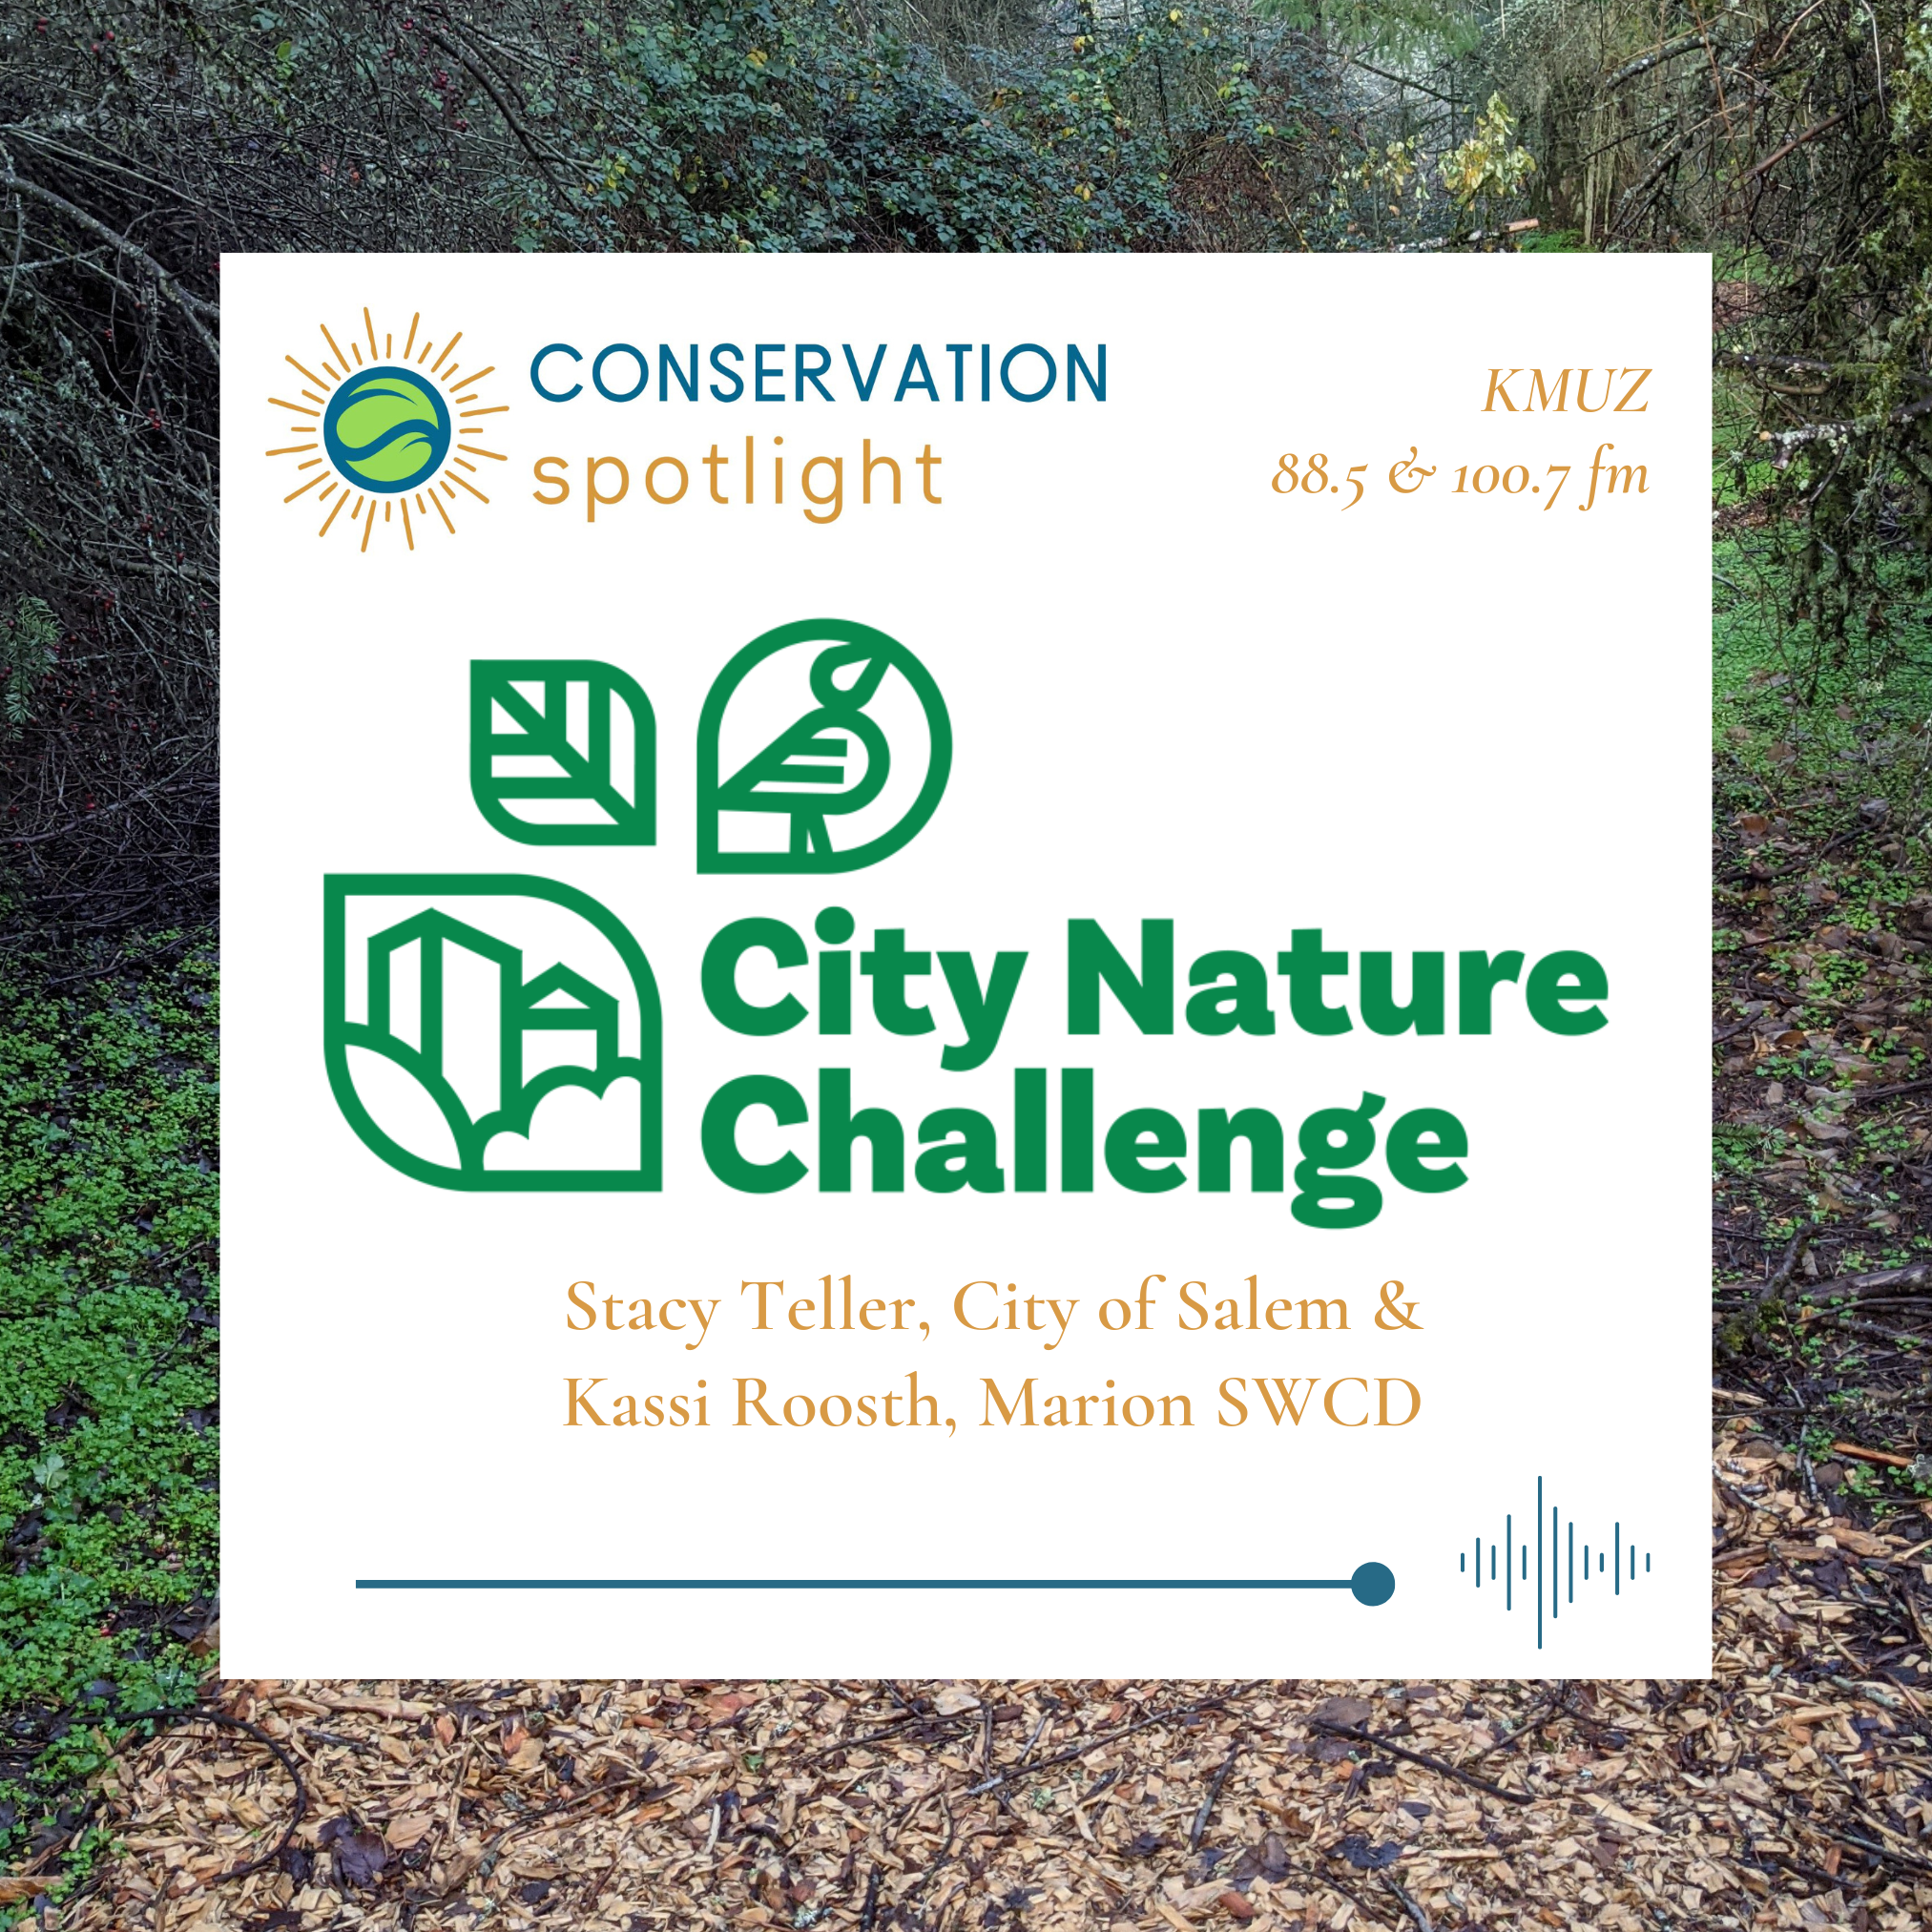 A woodland trail in background with the City Nature Challenge logo (green leaf shapes with buildings, bird, and leaf inside) up front announcing the March episode of Conservation Spotlight